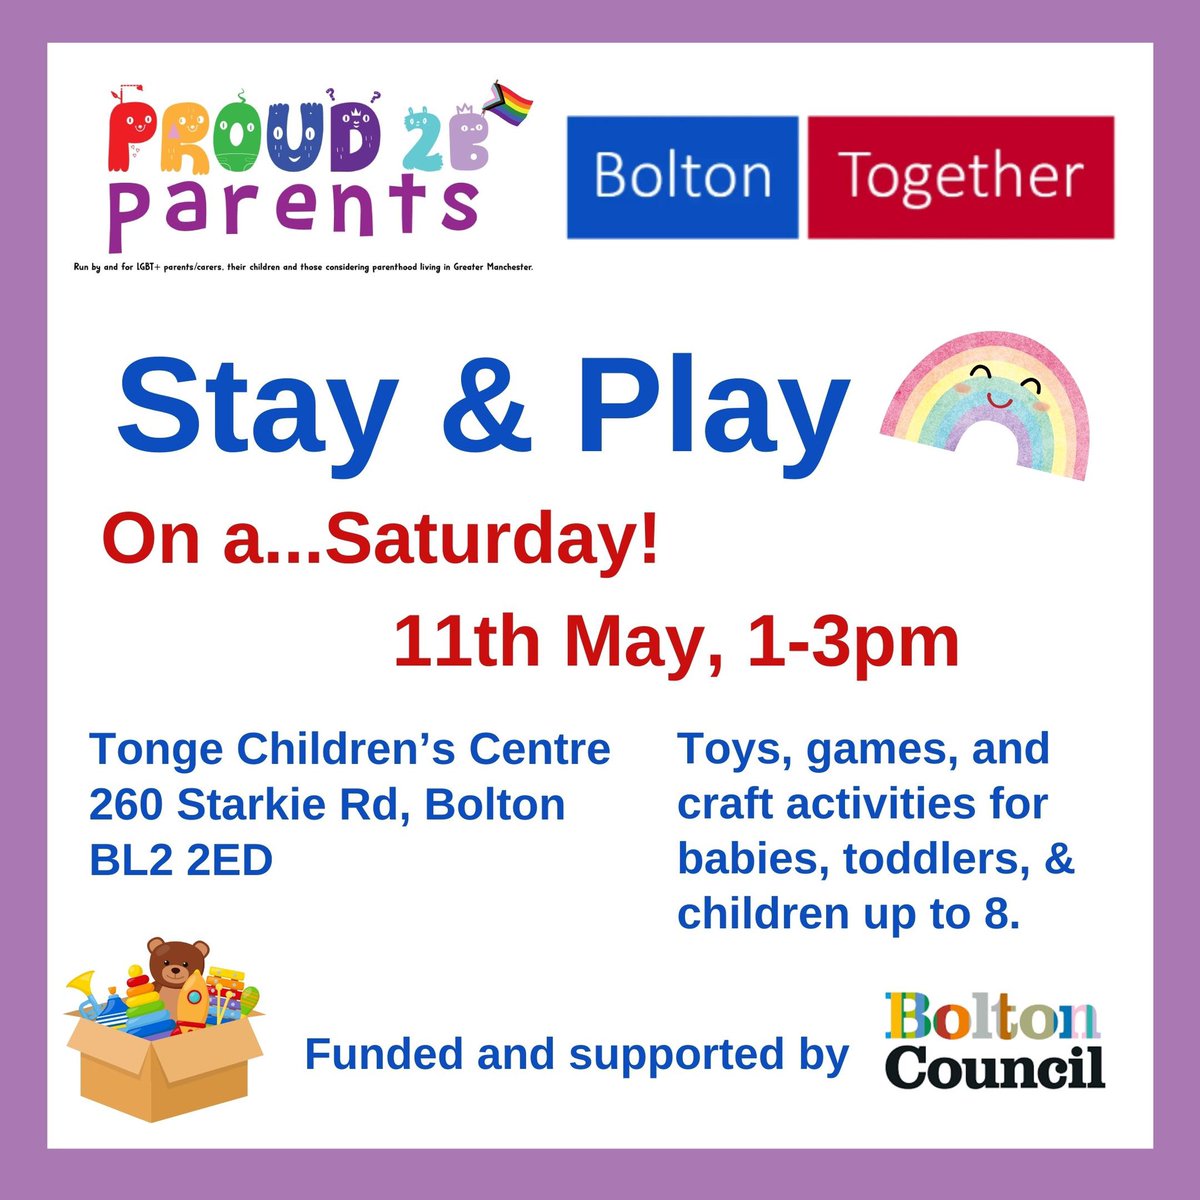 Proud 2 b Parents events happening this week: We have not 1, but 2, meet-ups in Bolton (but open to all); our usual Stay & Play on Thursday plus one on Saturday! (But note it’s a different venue on the Saturday.) Plus a trip to MOSI and a meet-up for families through adoption!